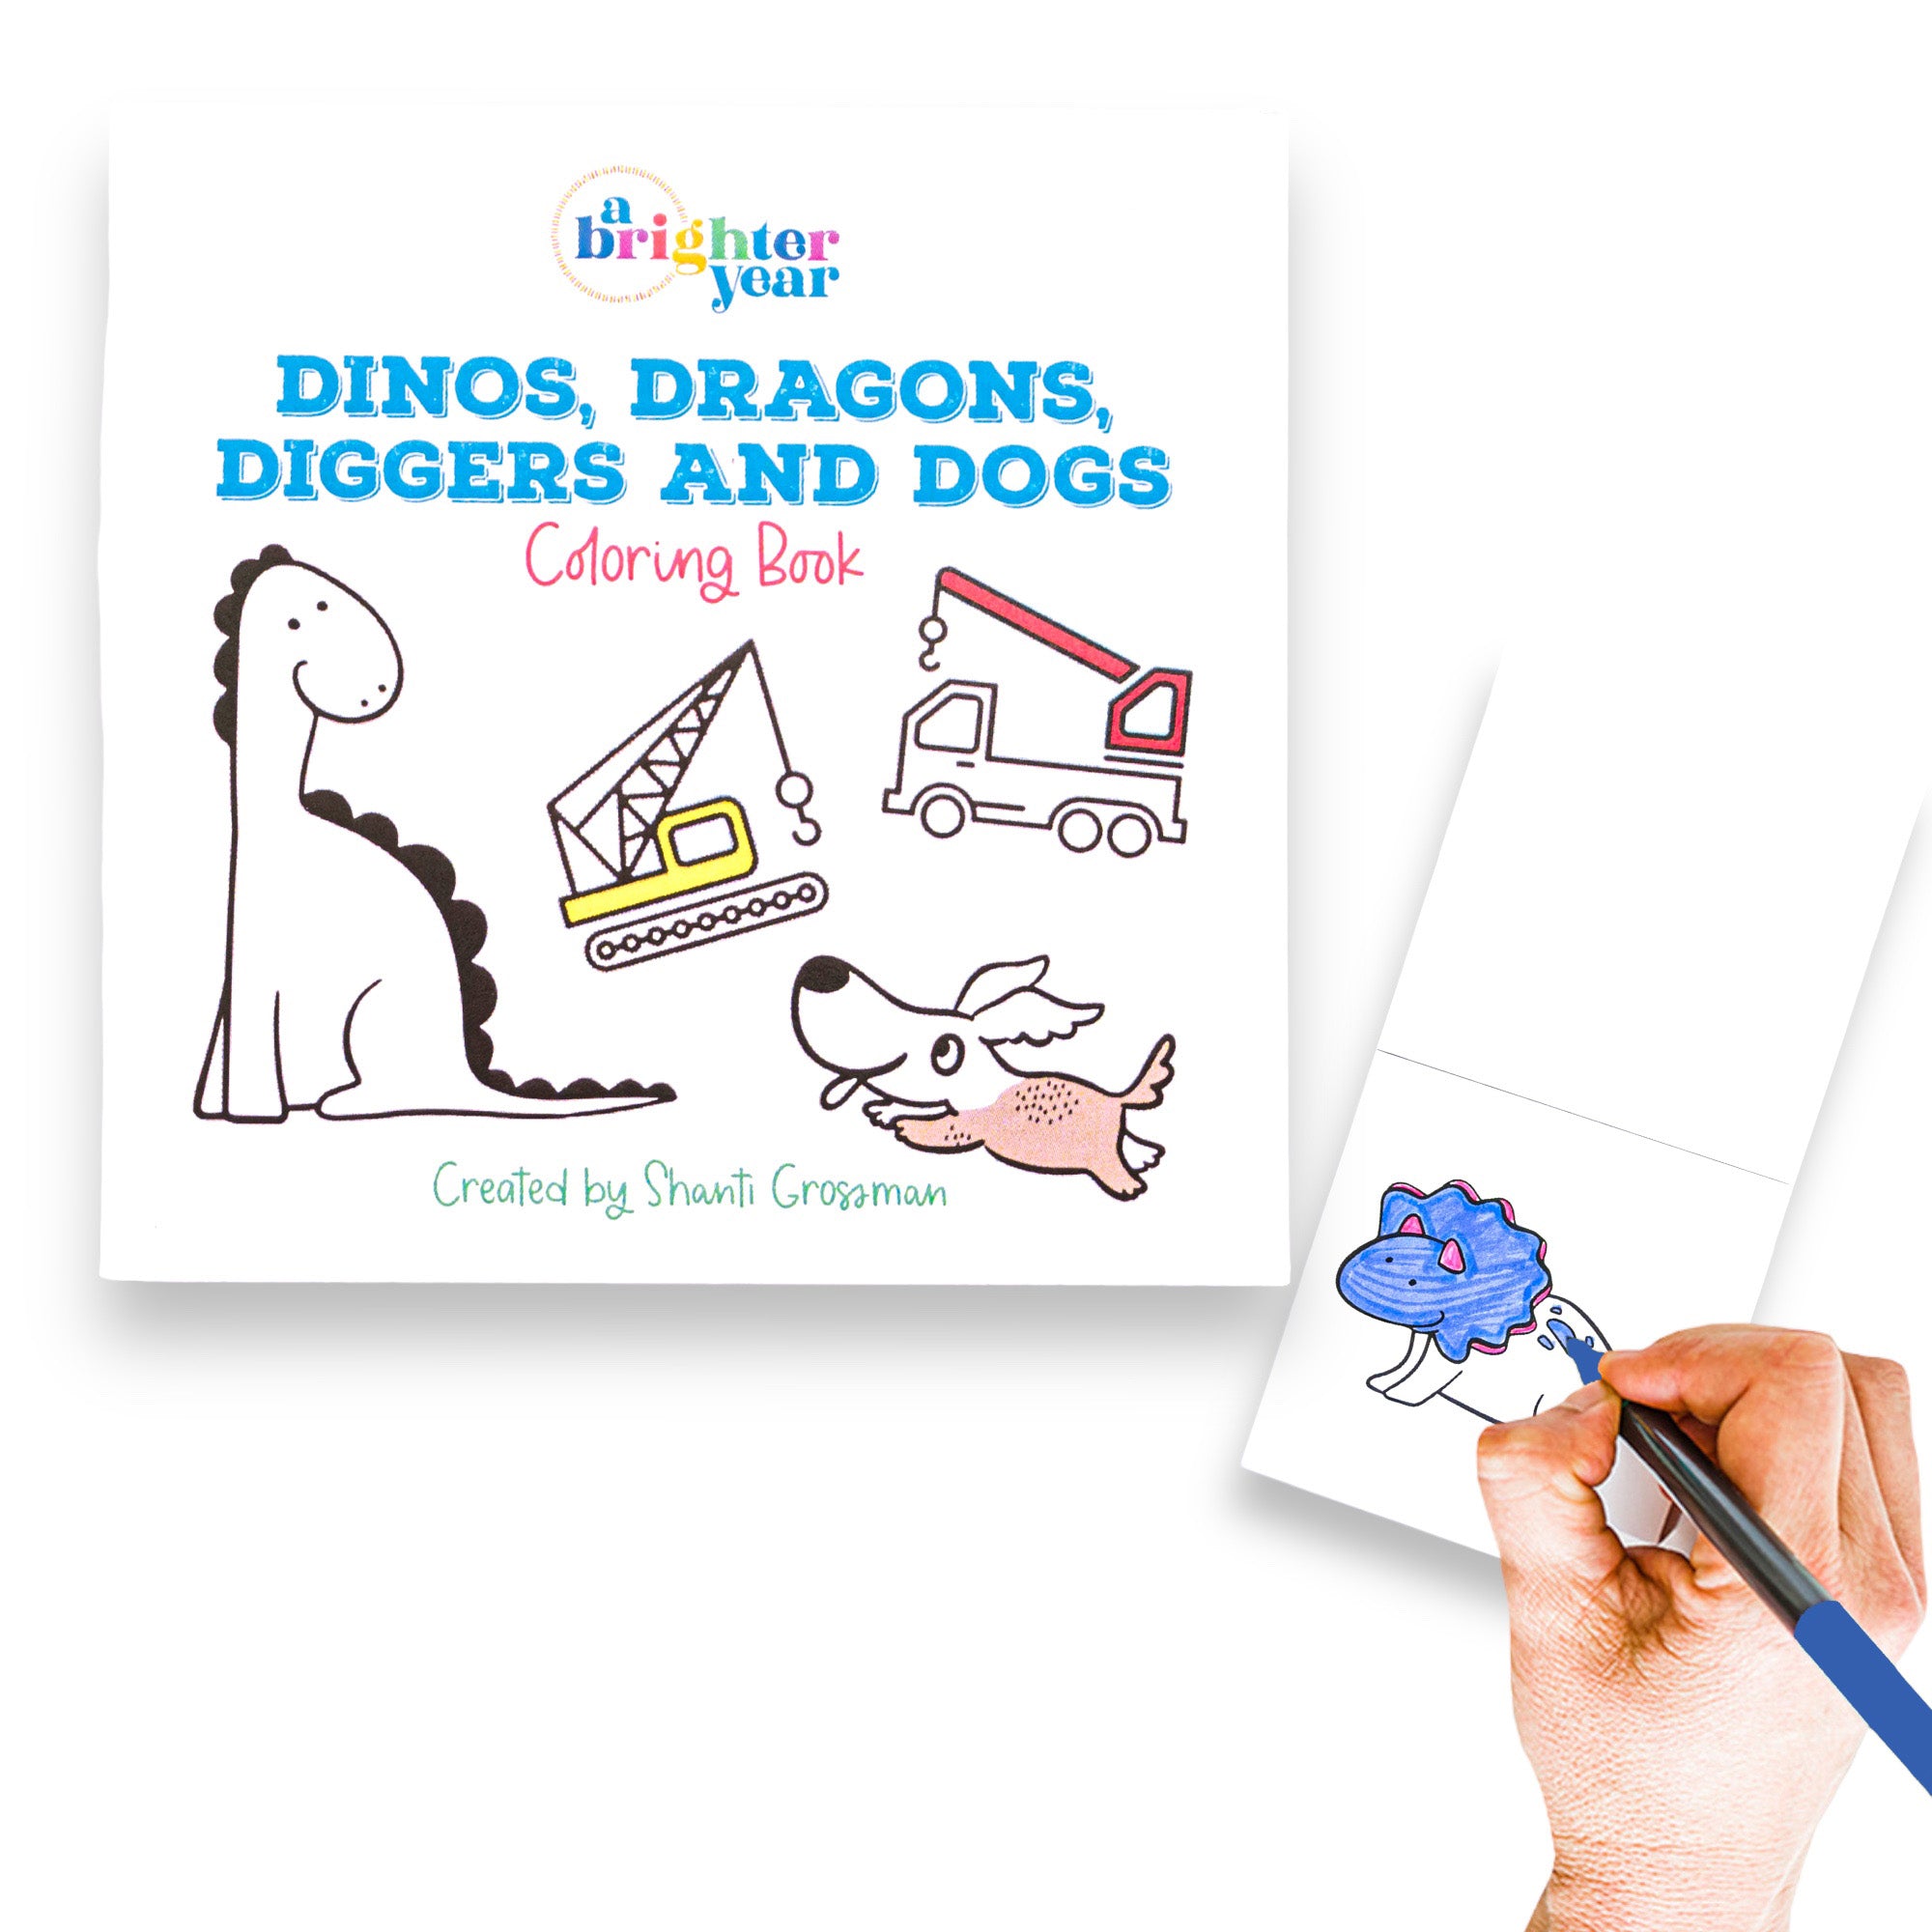 Dinos Dragons Diggers and Dogs Mini Coloring Book – A Brighter Year